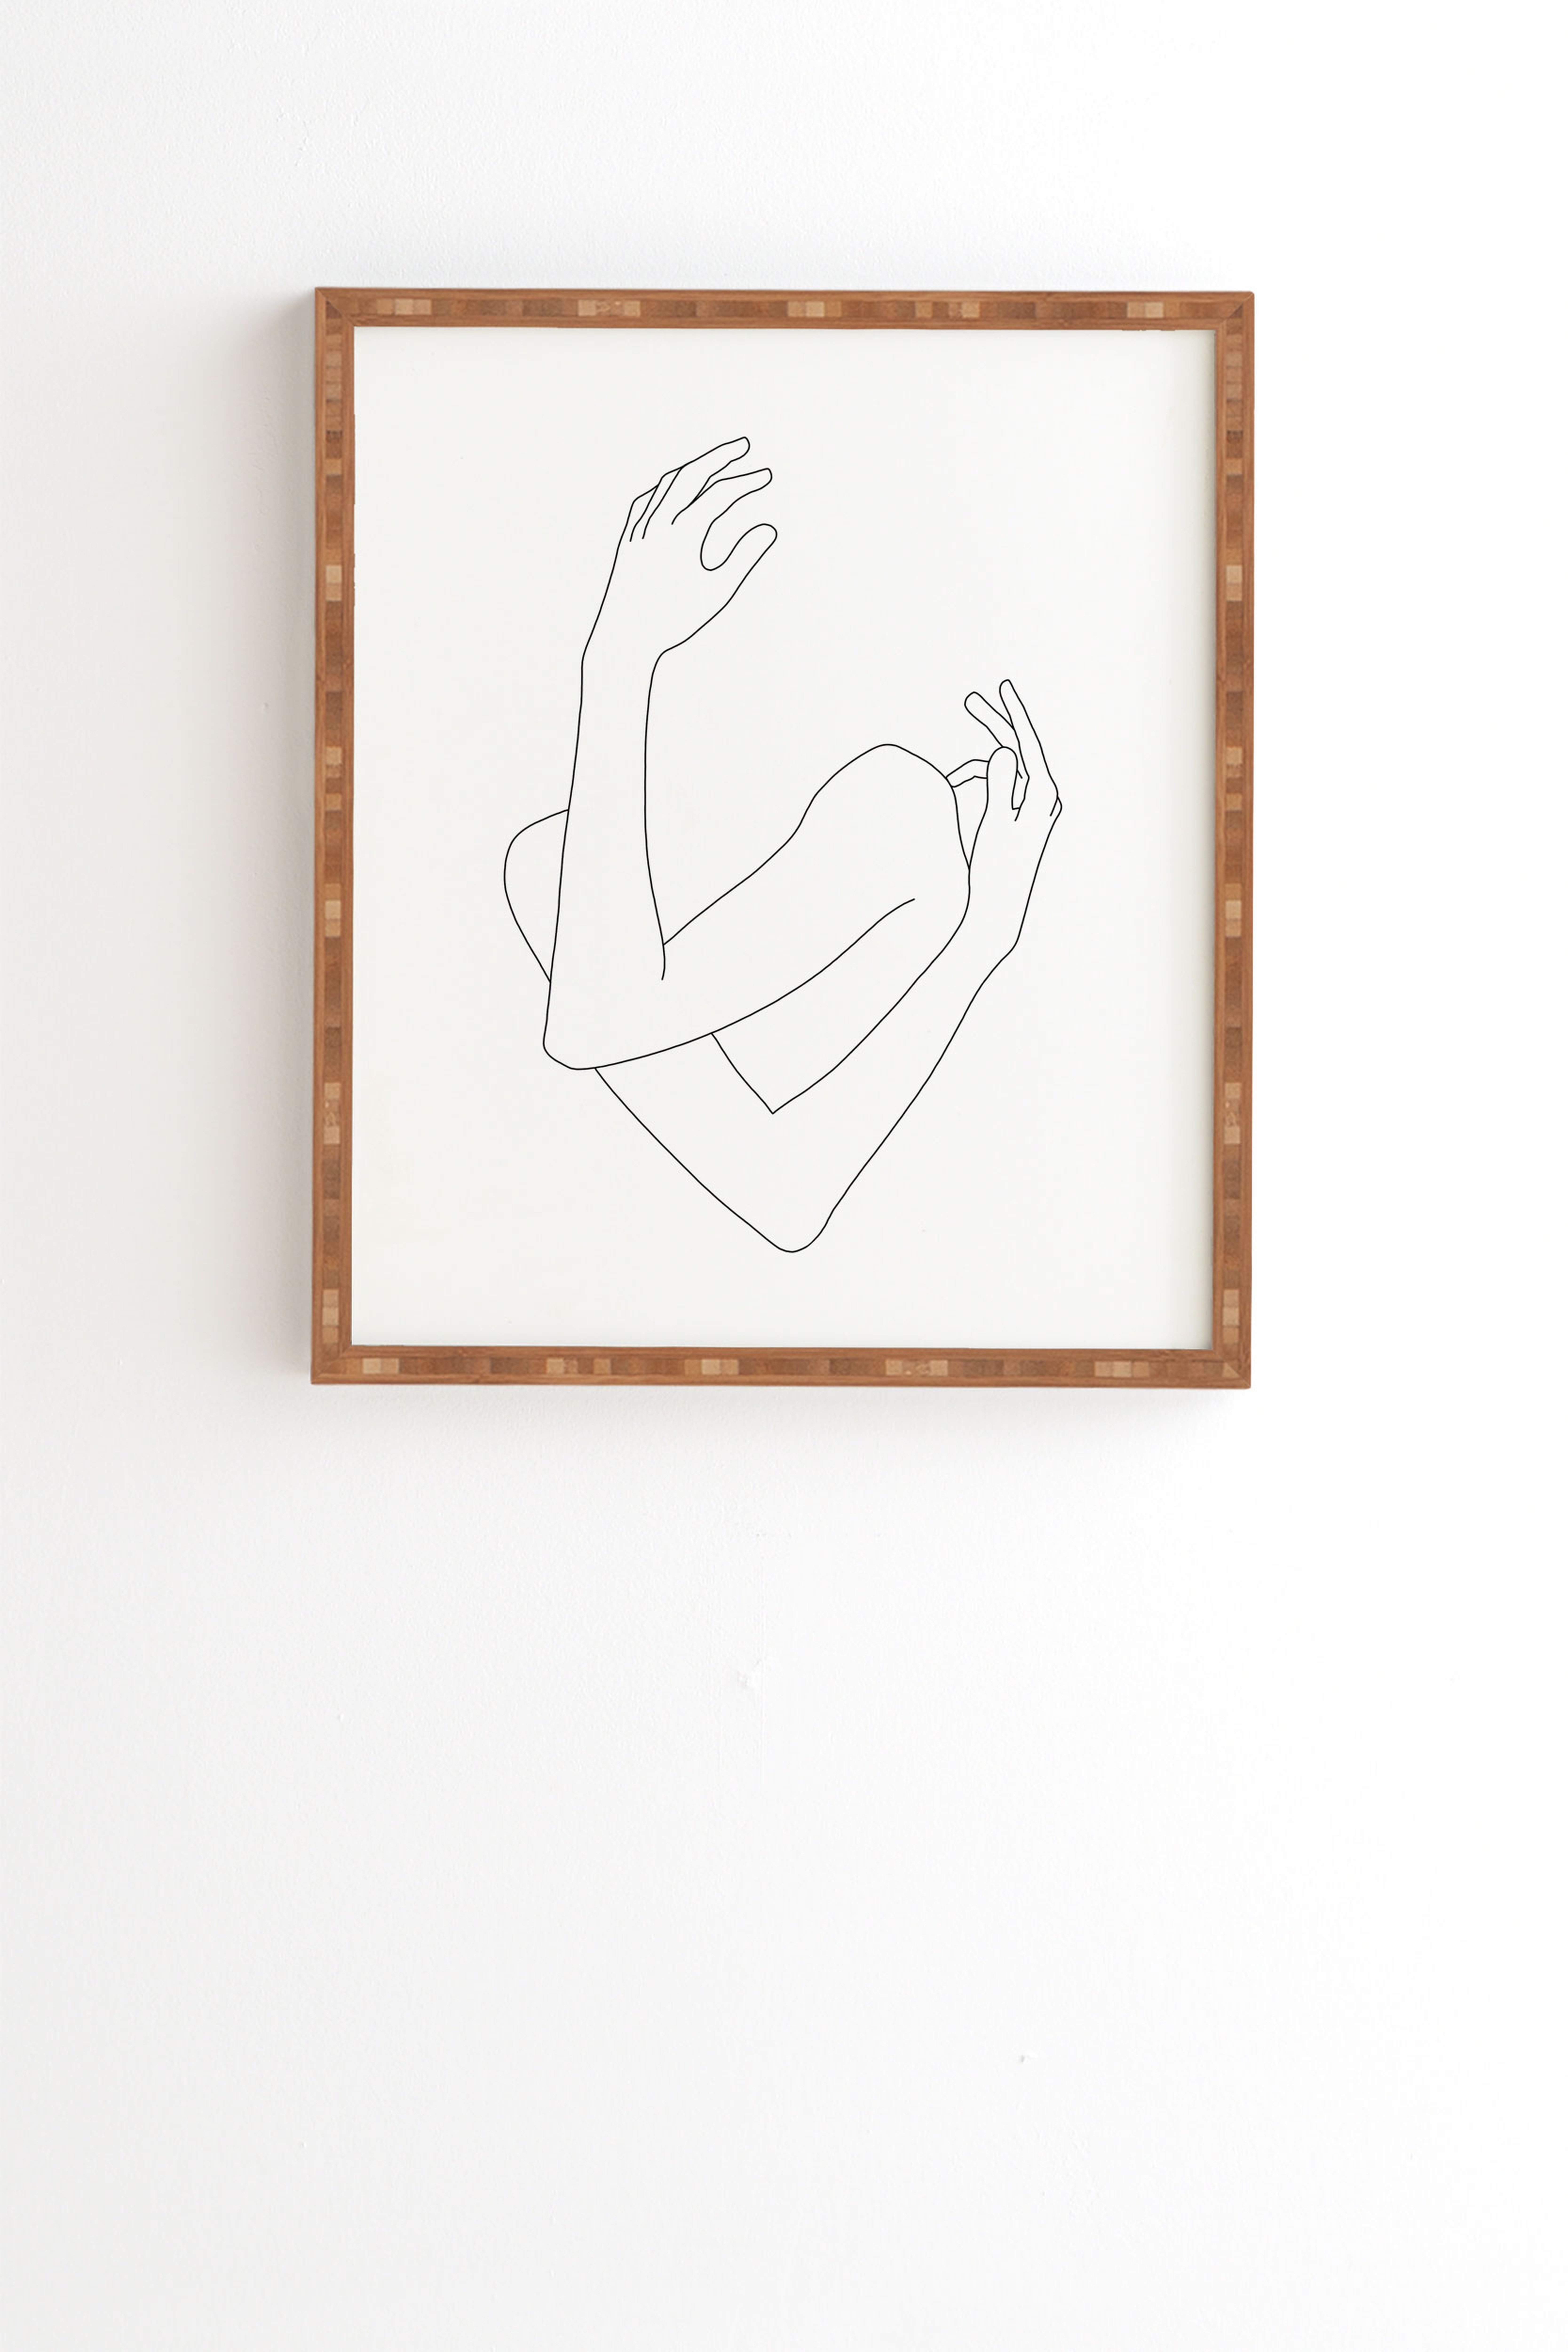 Crossed Arms Illustration Jill by The Colour Study - Framed Wall Art Bamboo 11" x 13" - Wander Print Co.